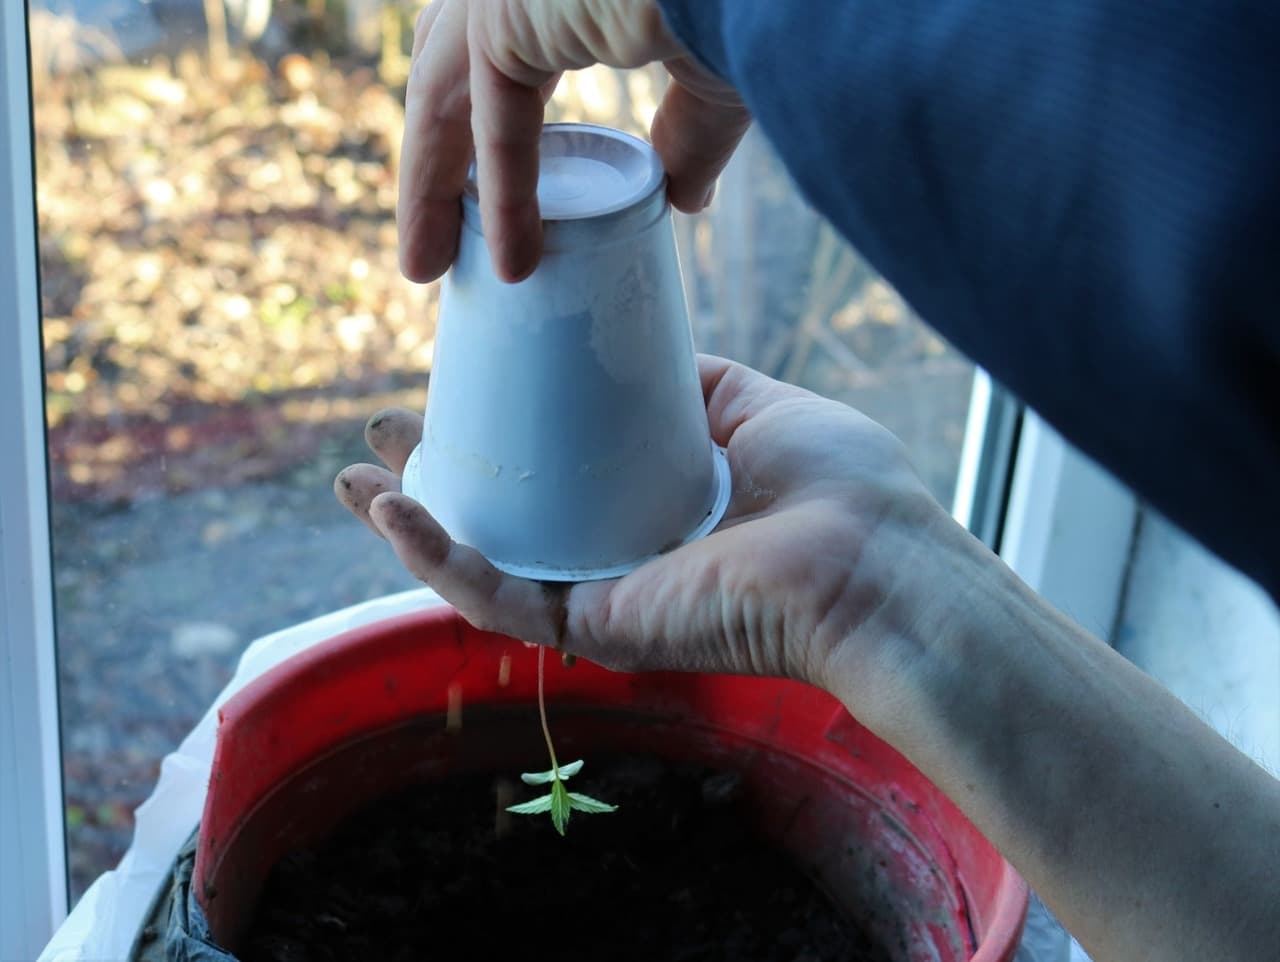 transplanting process allows the roots to spread out and become even stronger